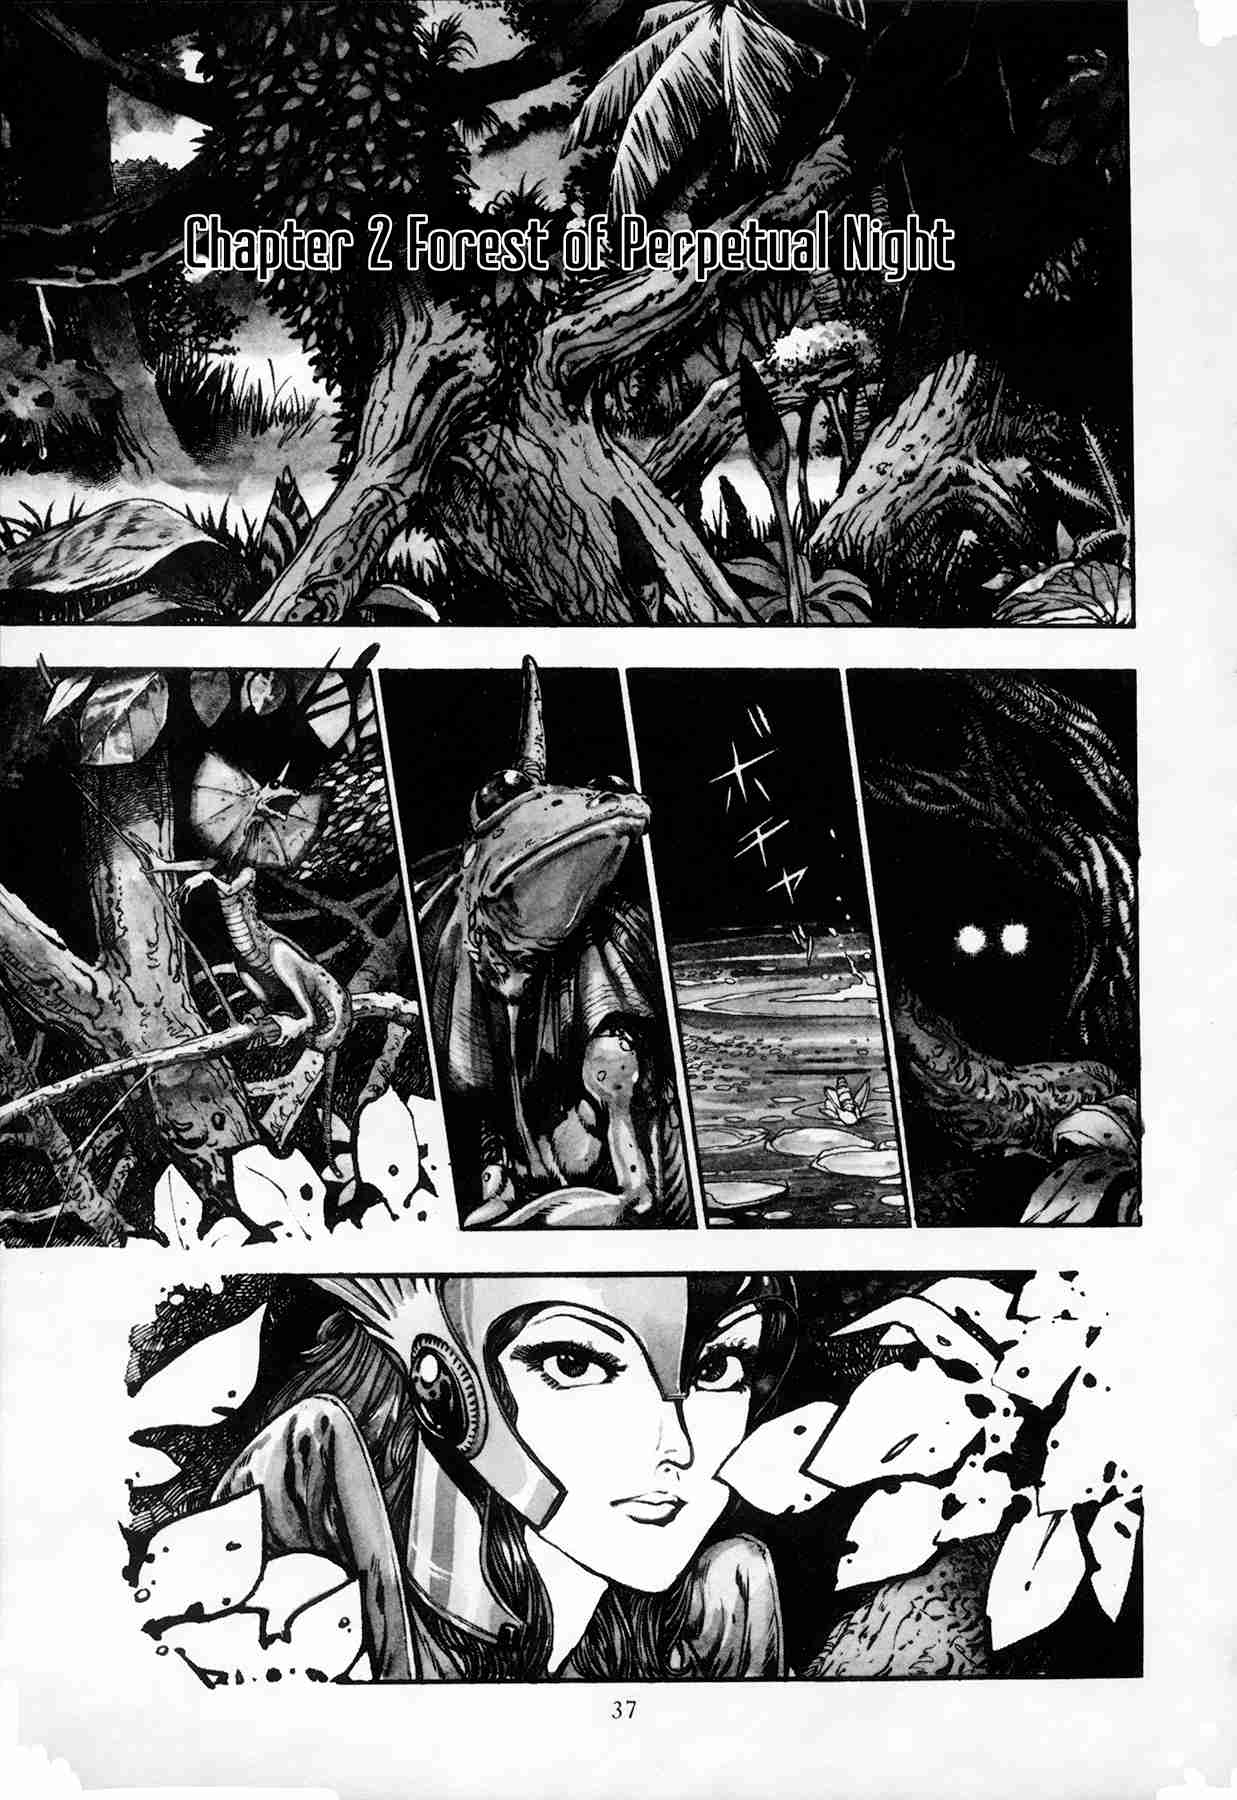 The Planet Garaga Vol. 1 Ch. 2 Forest of Perpetual Night